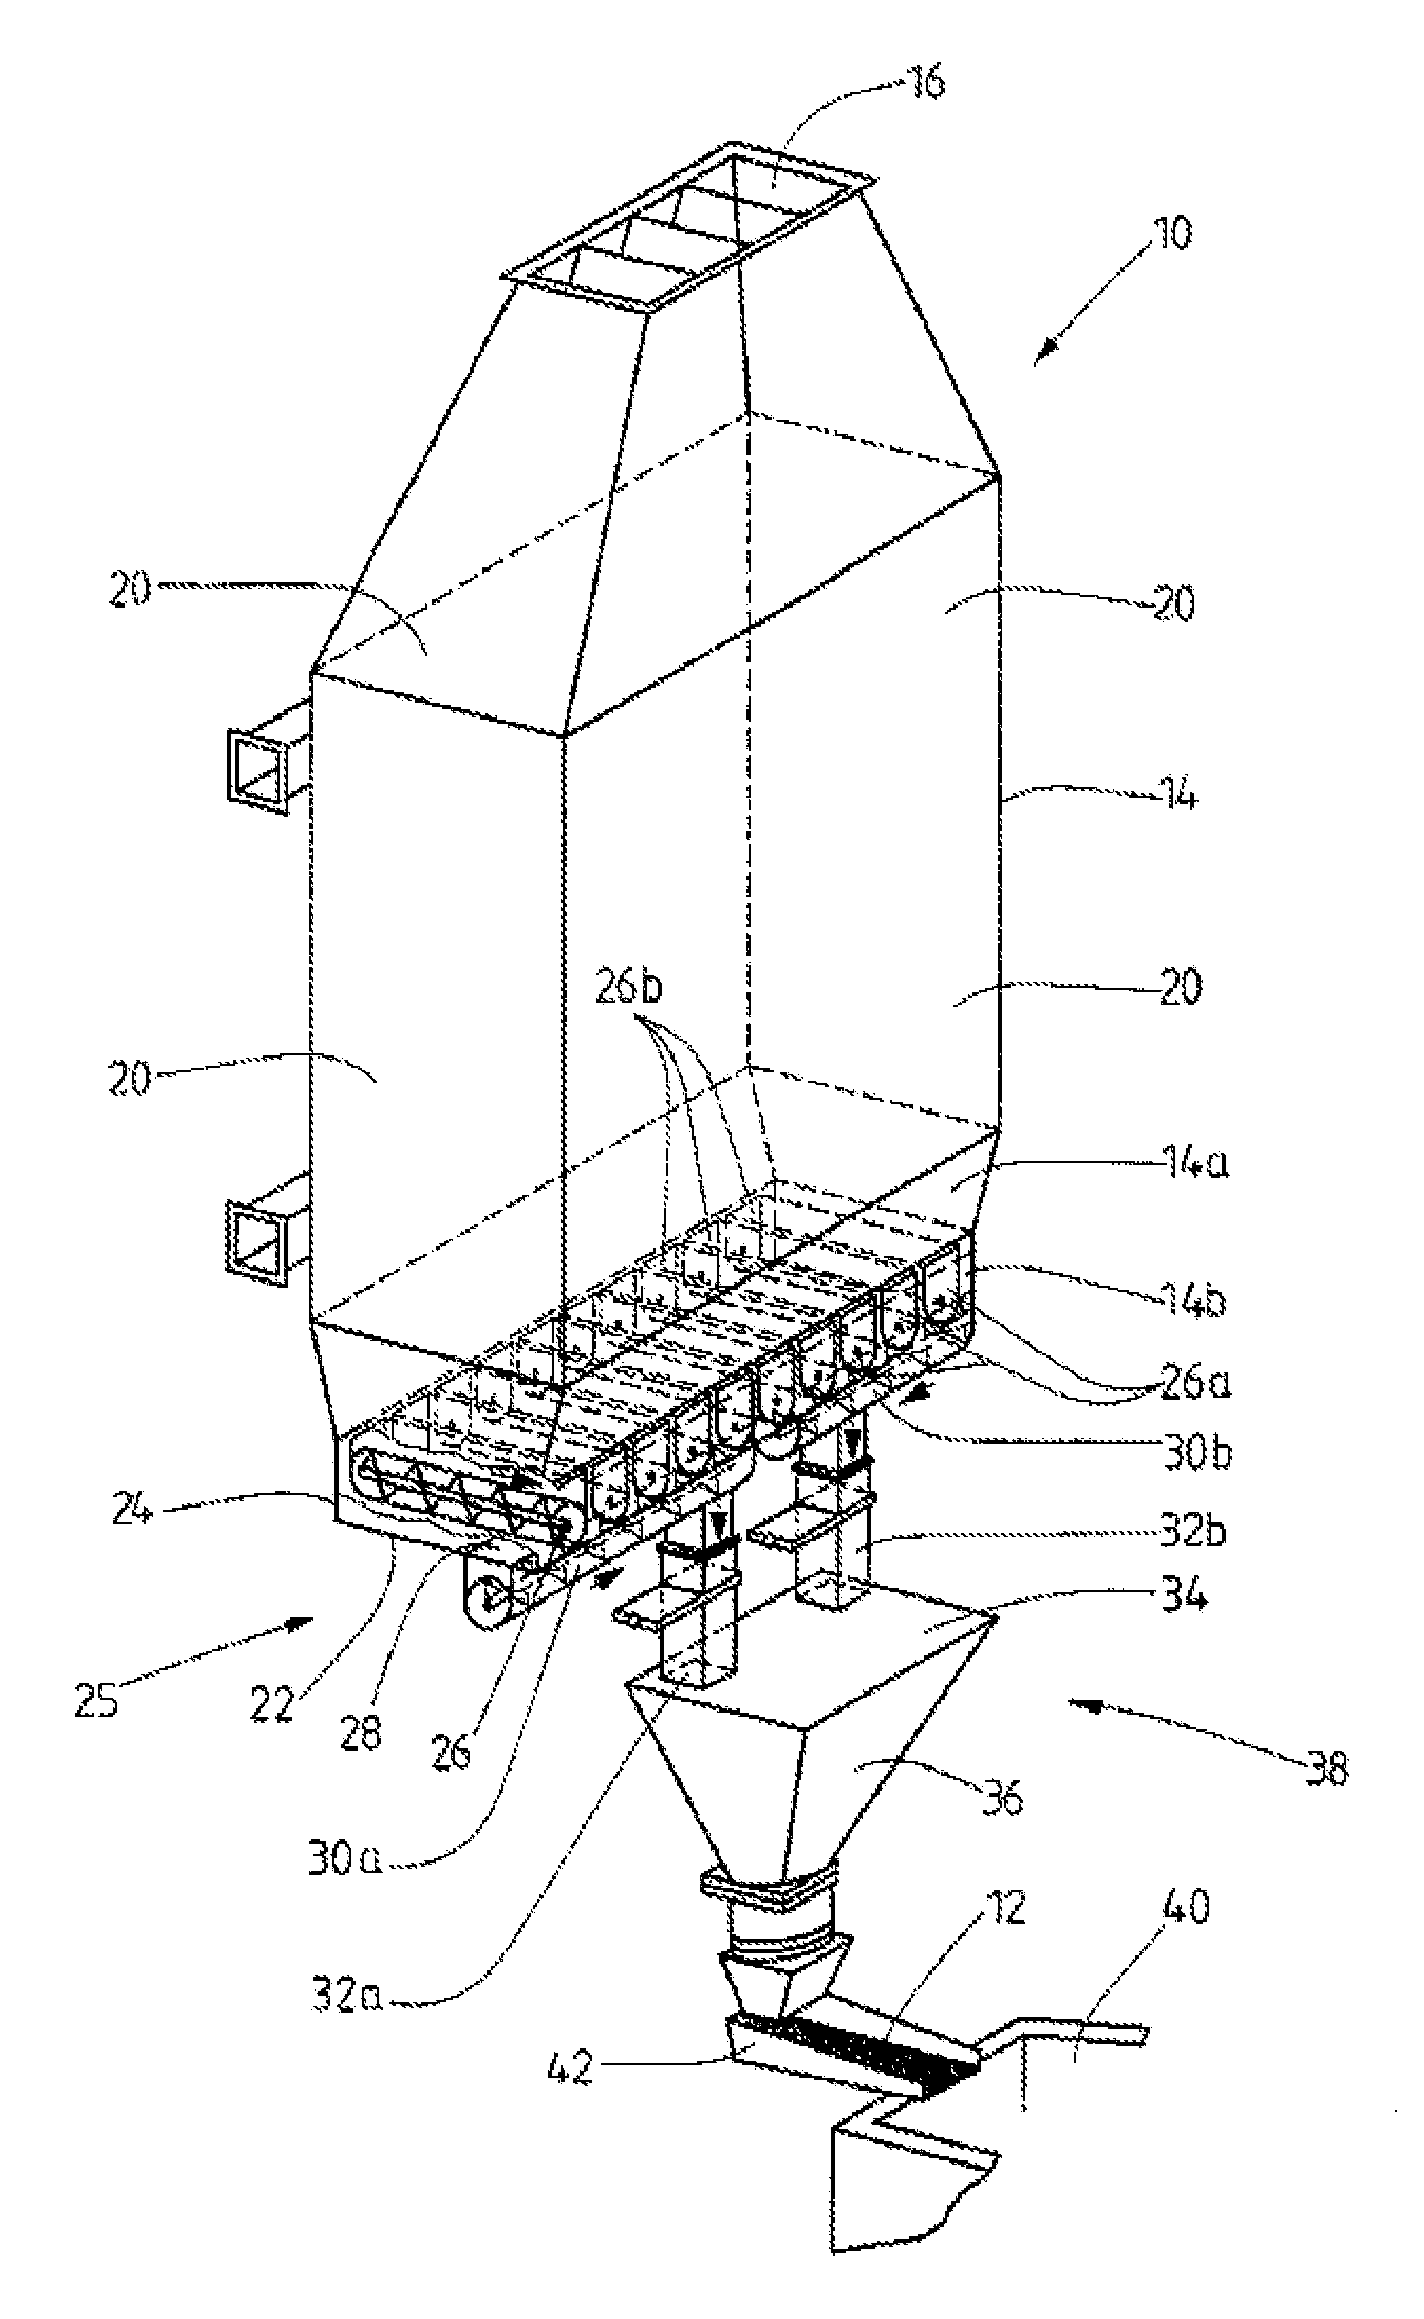 Apparatus for preheating batches of glass cullet